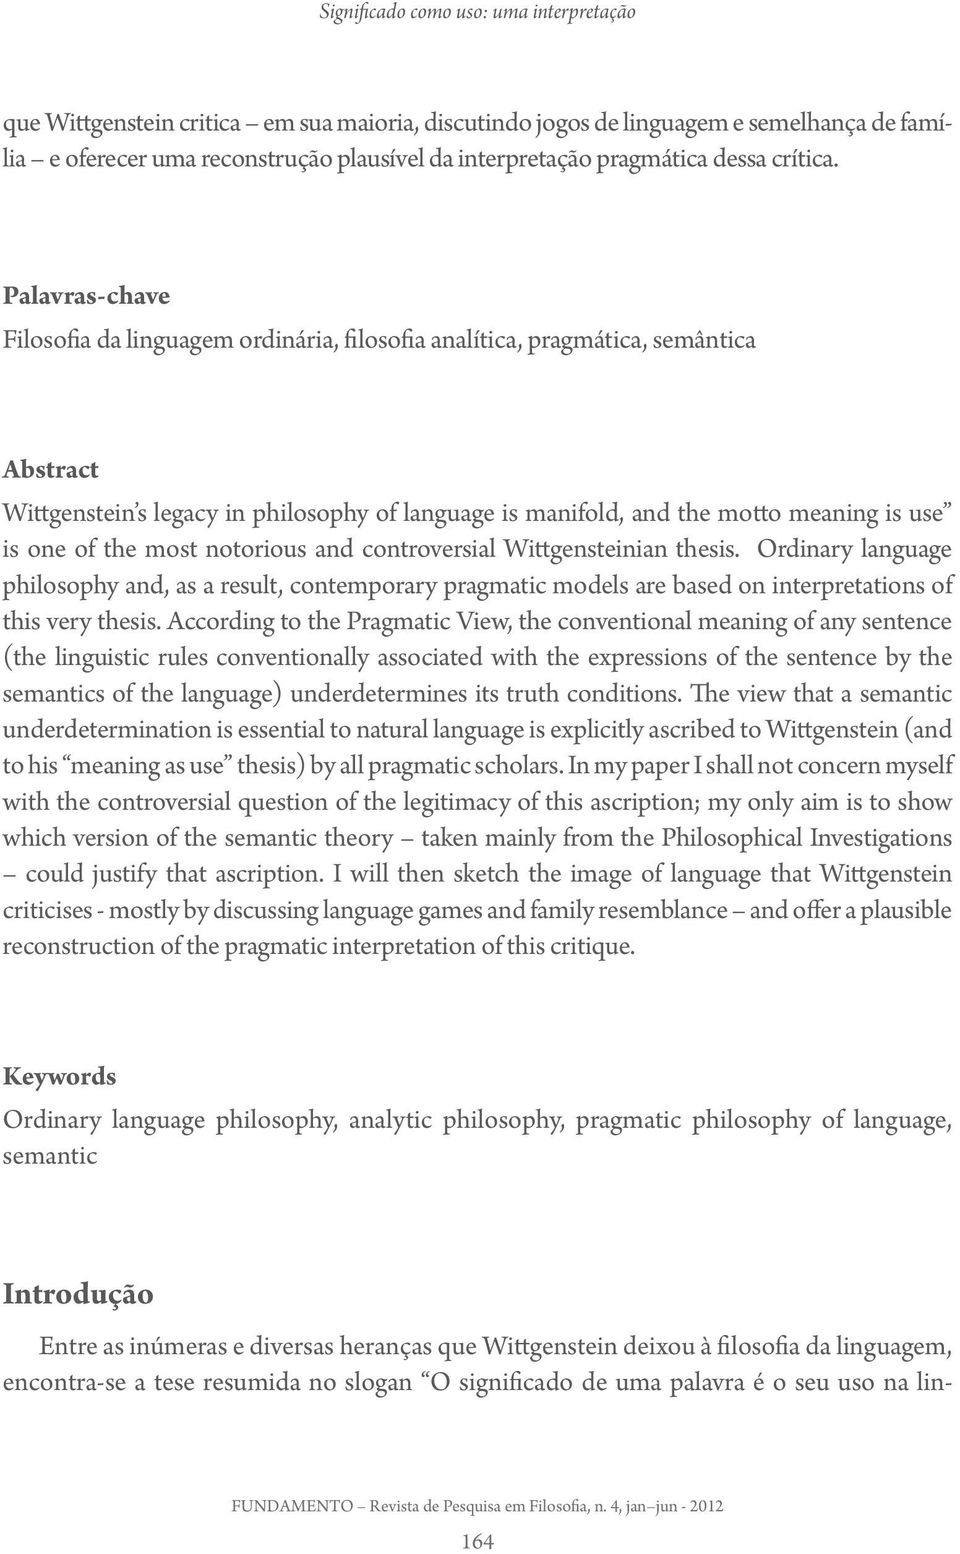 of the most notorious and controversial Wittgensteinian thesis. Ordinary language philosophy and, as a result, contemporary pragmatic models are based on interpretations of this very thesis.